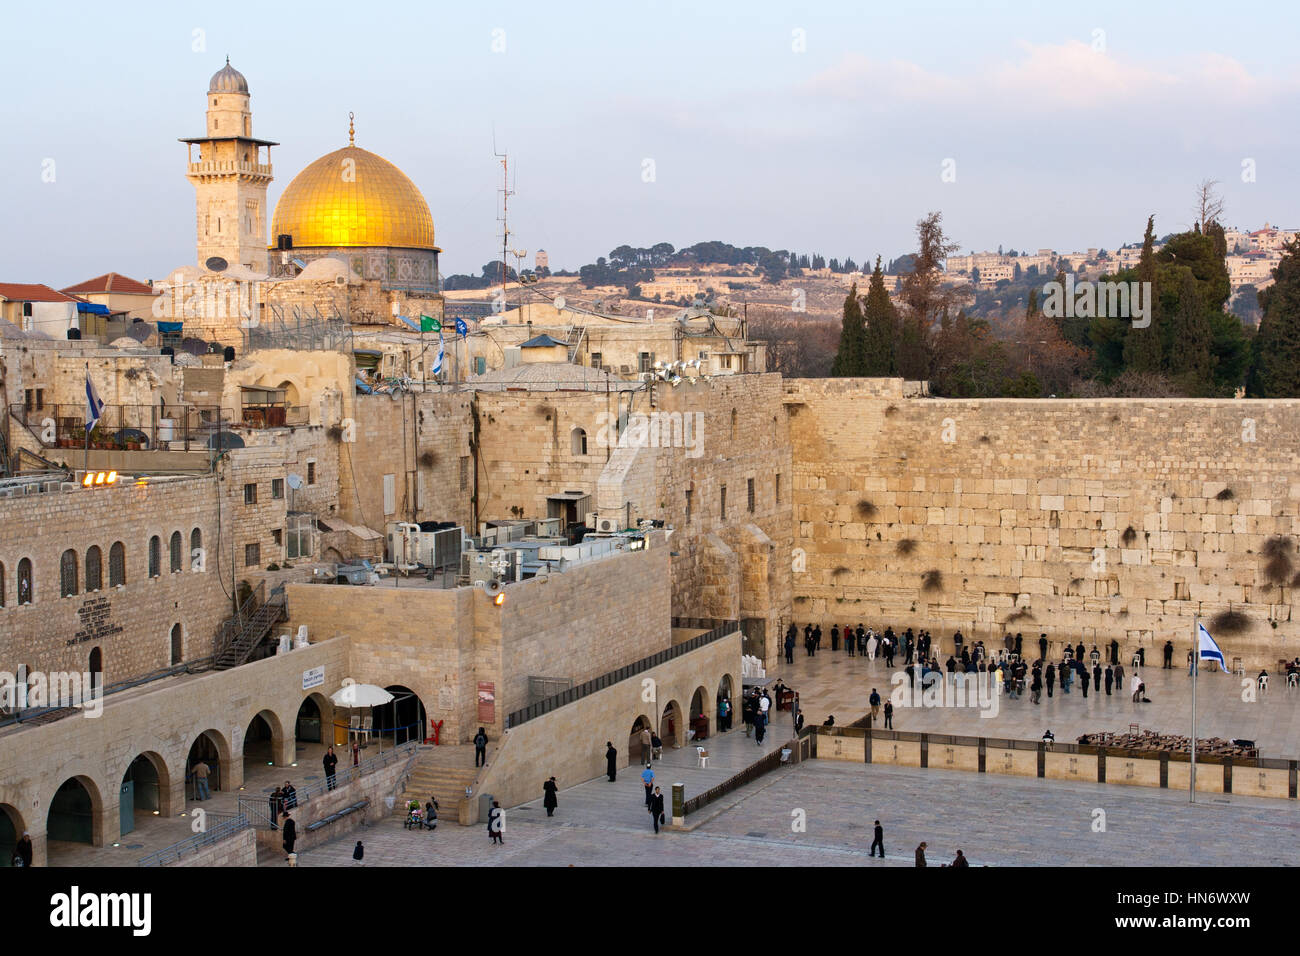 JERUSALEM, ISRAEL - JANUARY 24: Jewish worshipers pray at the Wailing Wall January 24, 2011 in Jerusalem, Israel. The wall is the most sacred sites in Stock Photo